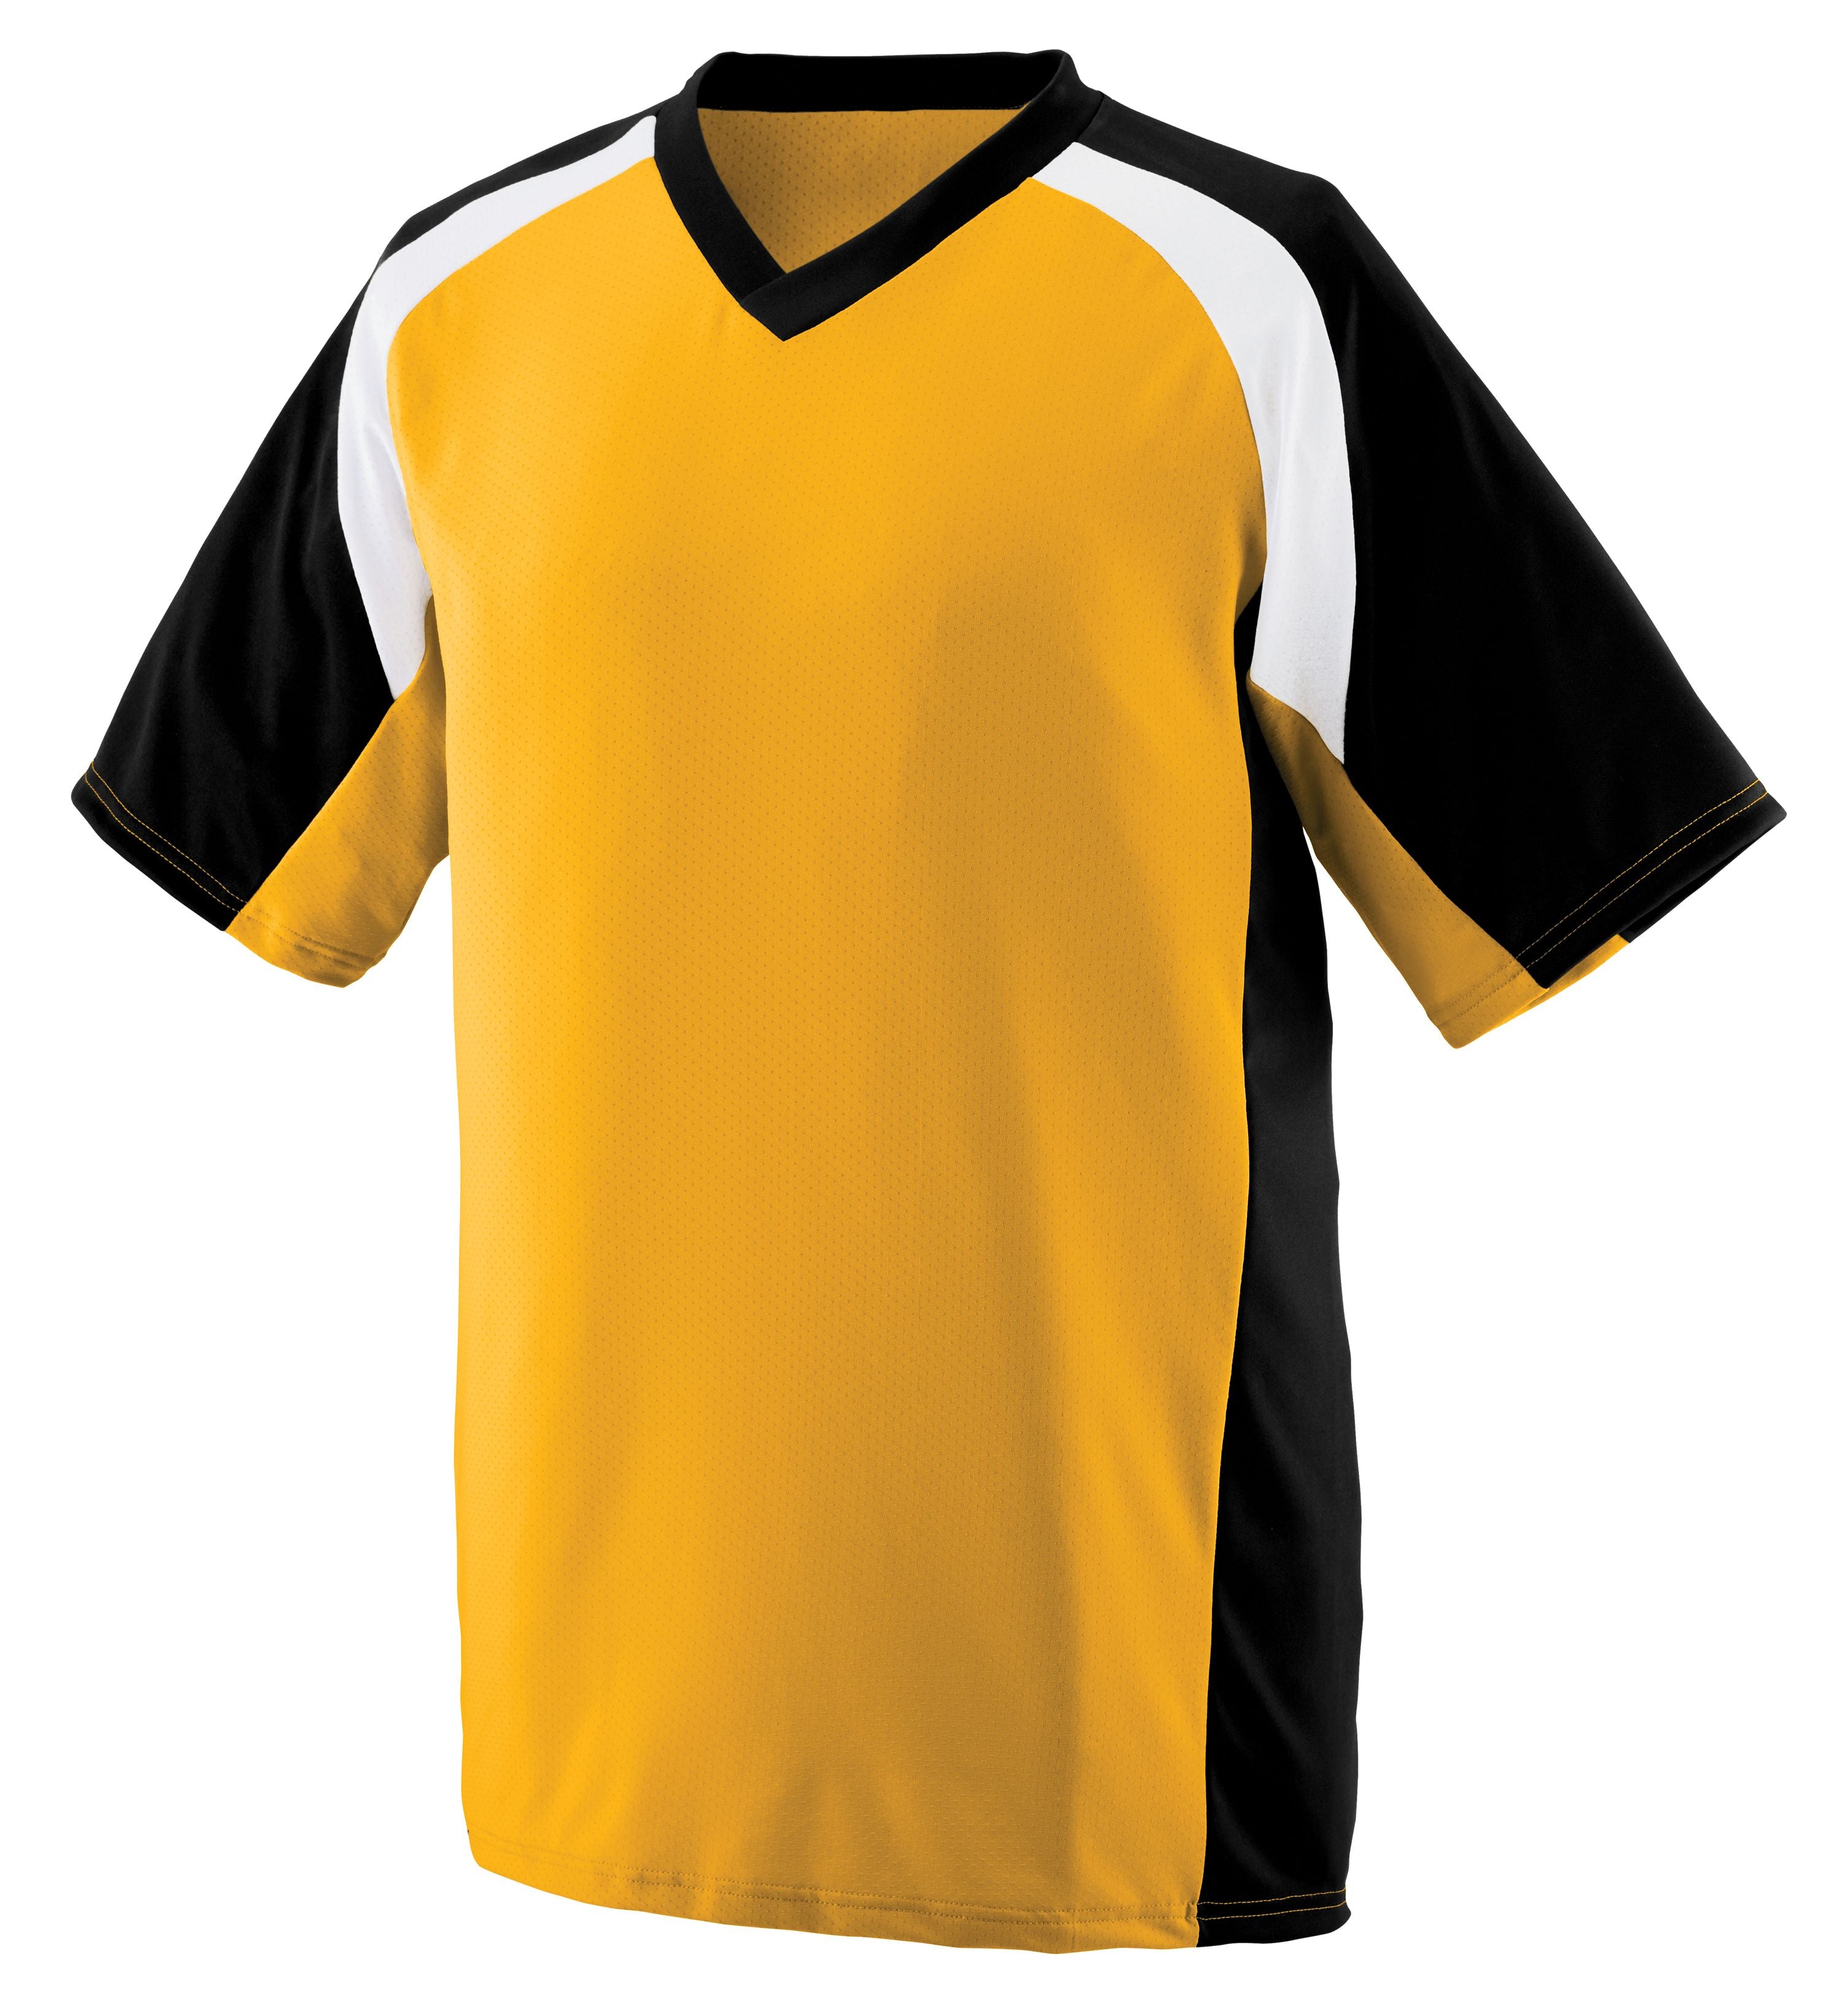 Augusta Sportswear Nitro Jersey in Gold/Black/White  -Part of the Adult, Adult-Jersey, Augusta-Products, Football, Shirts, All-Sports, All-Sports-1 product lines at KanaleyCreations.com